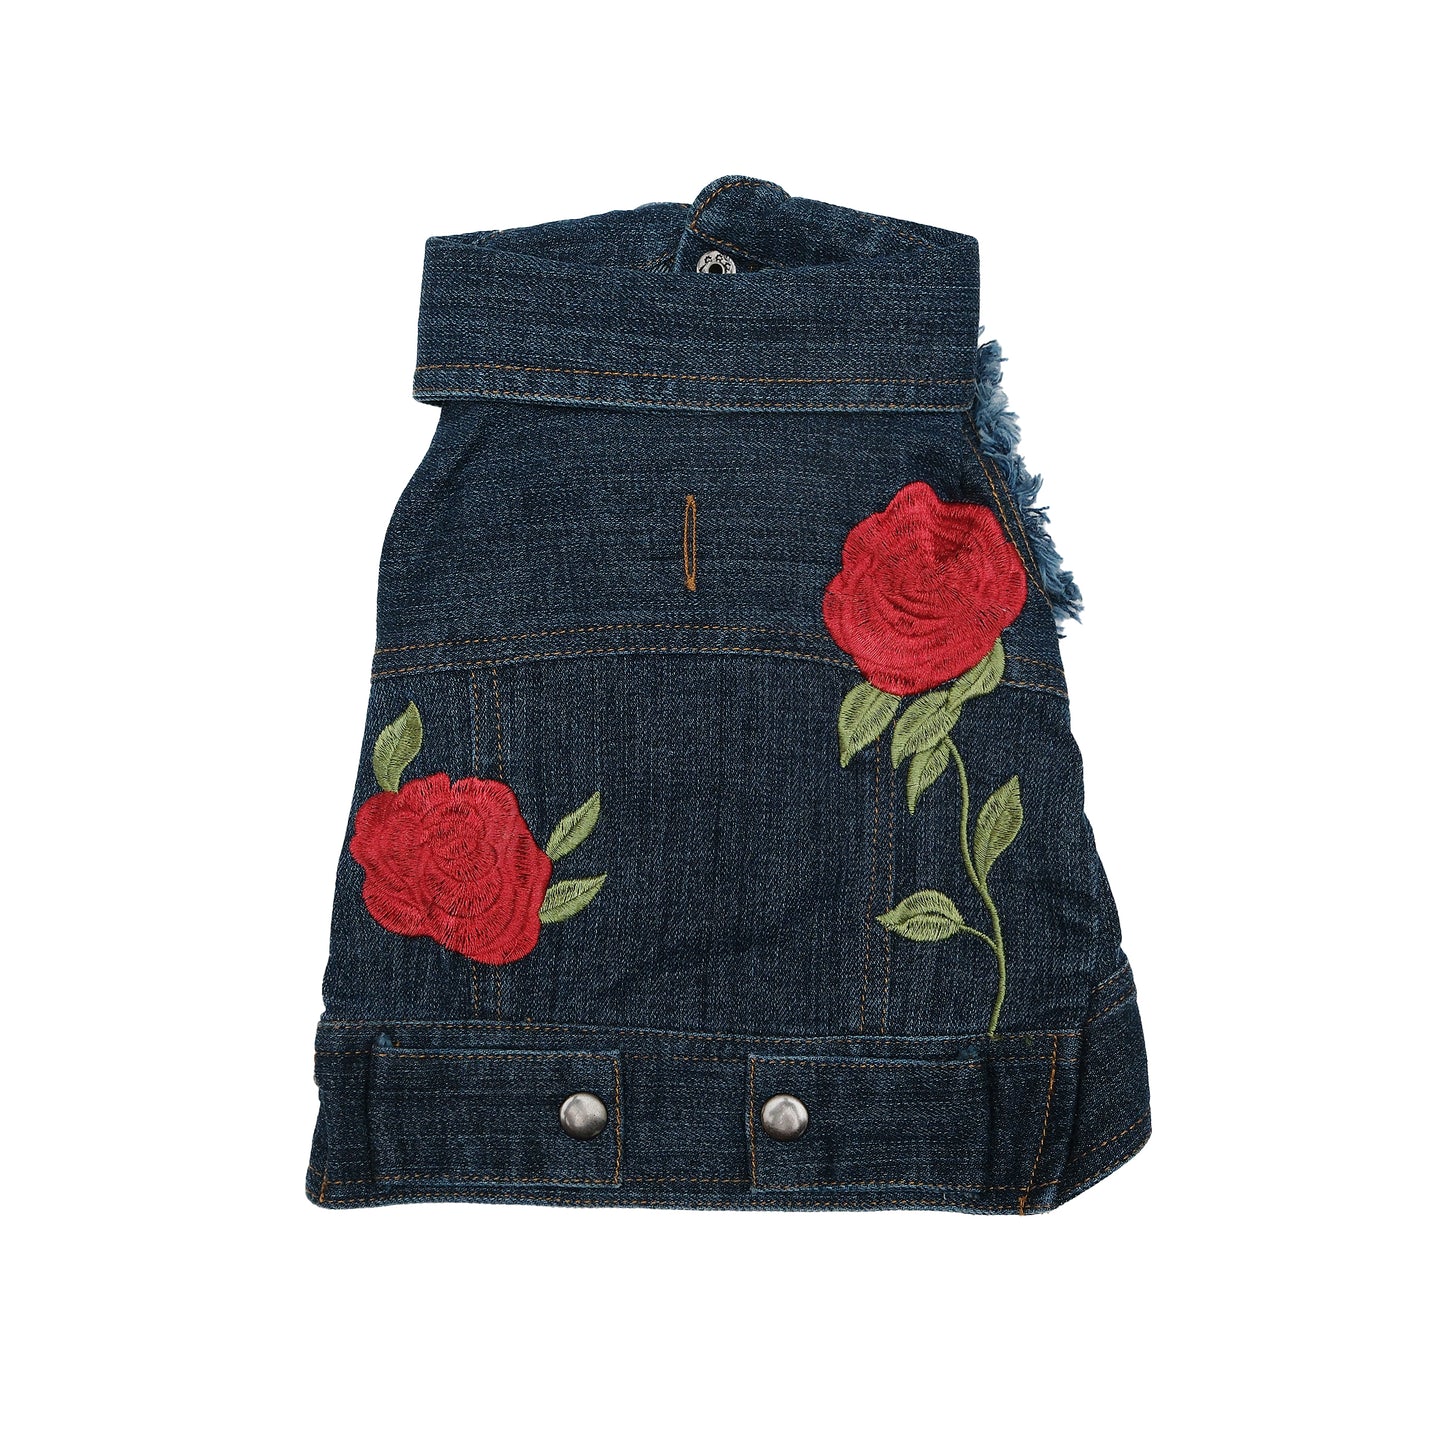 Up-cycled rose embroidered vest